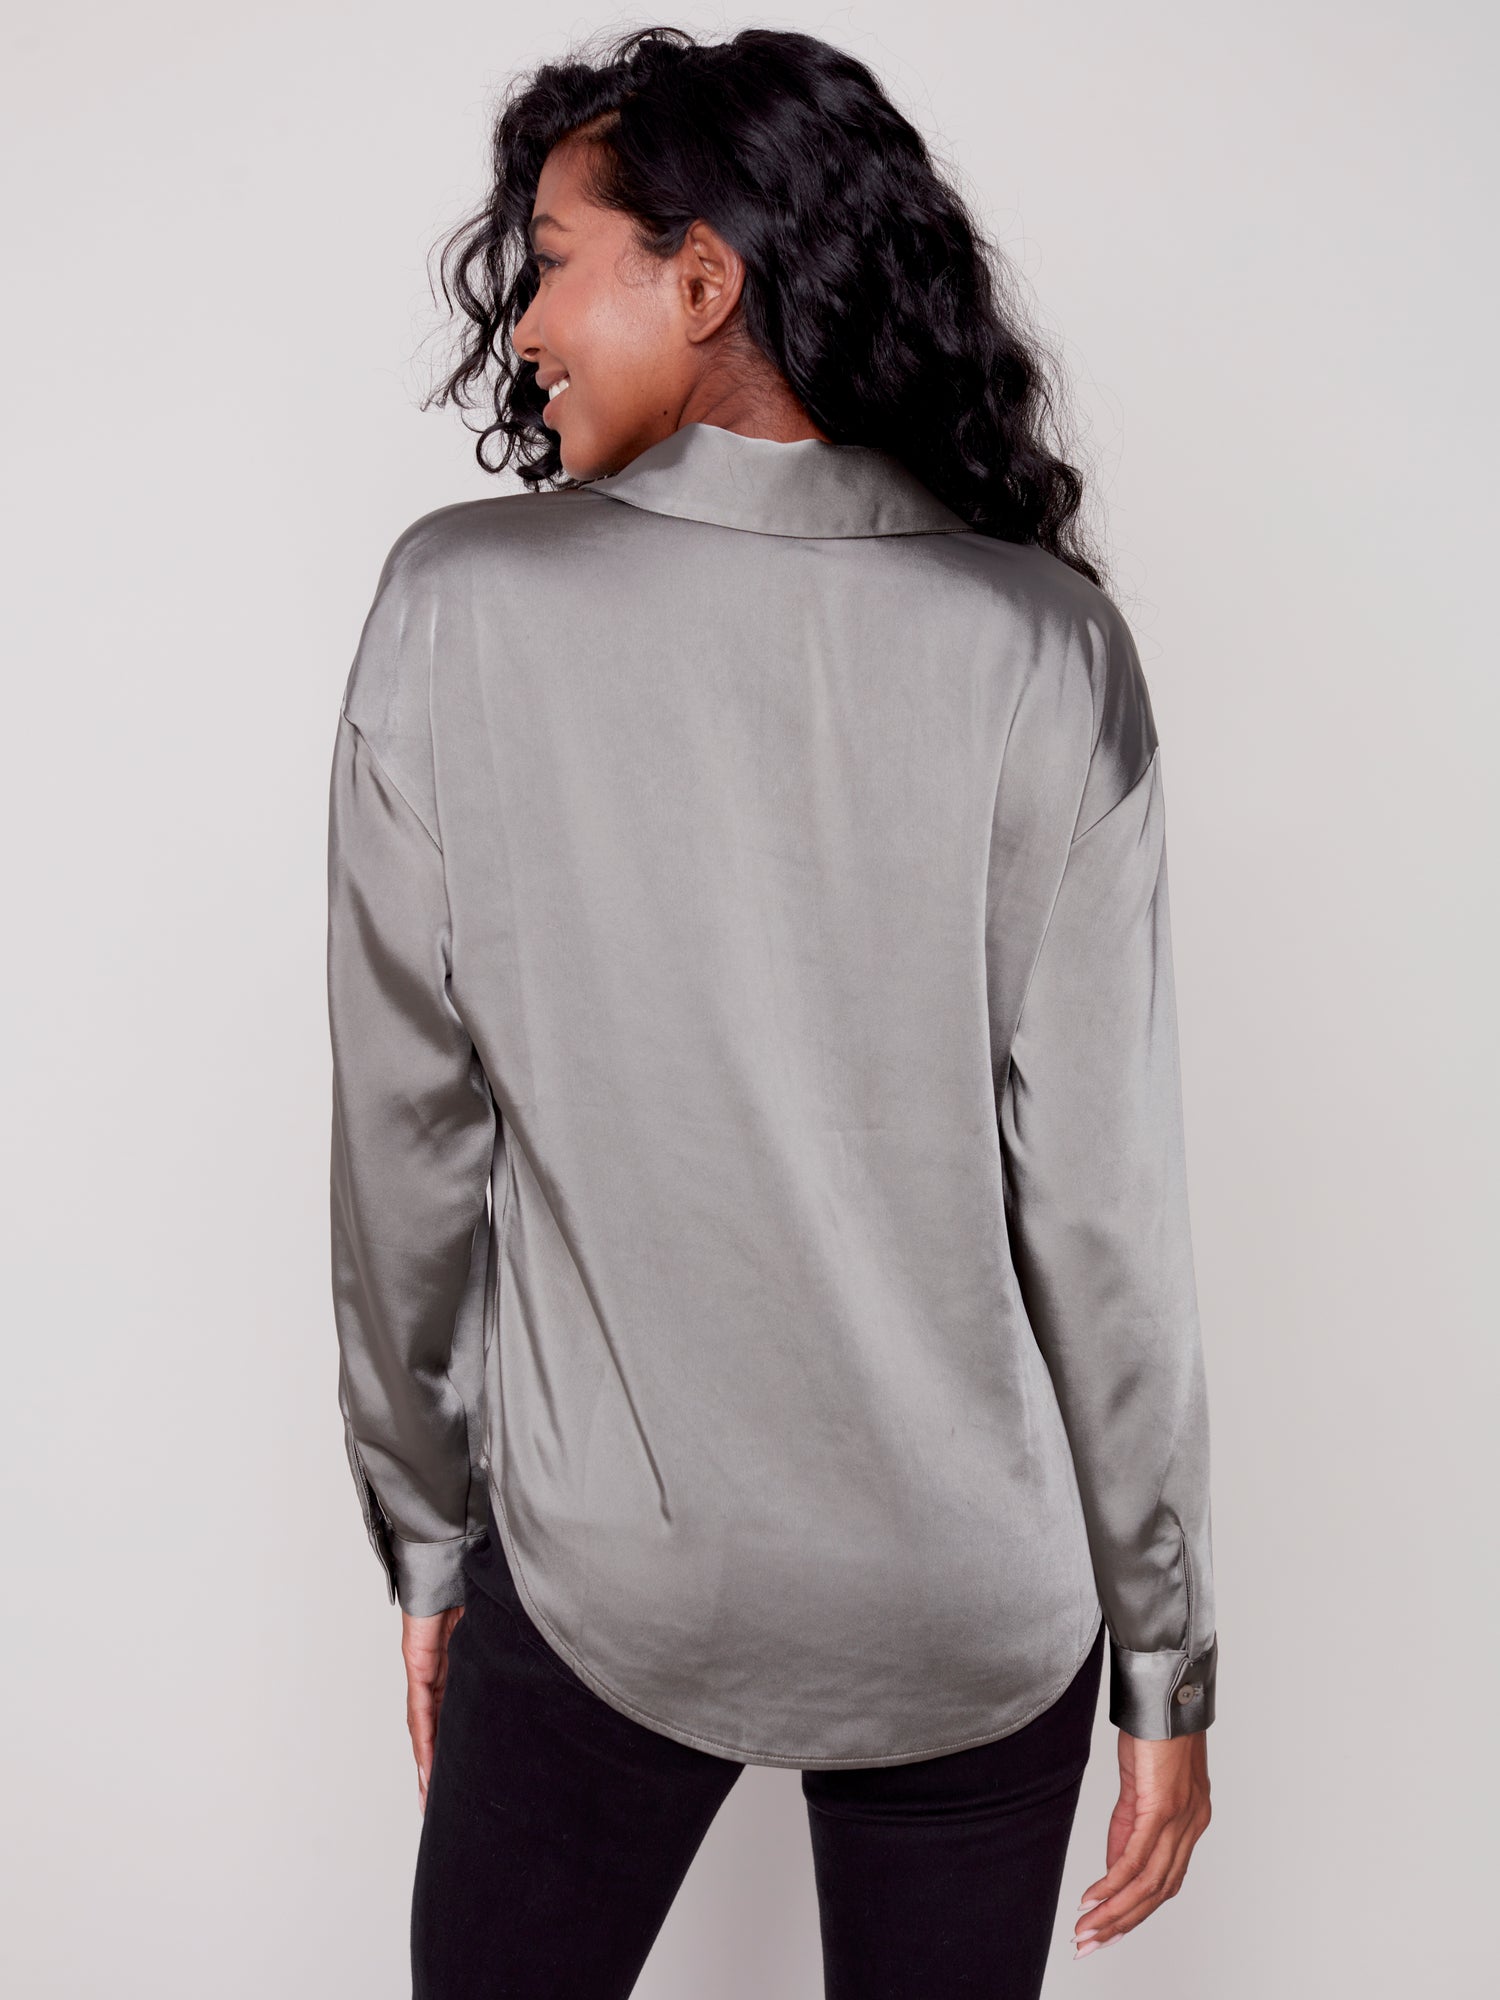 Charlie B Charlie B - Solid Satin Button Front Shirt - Spruce available at The Good Life Boutique